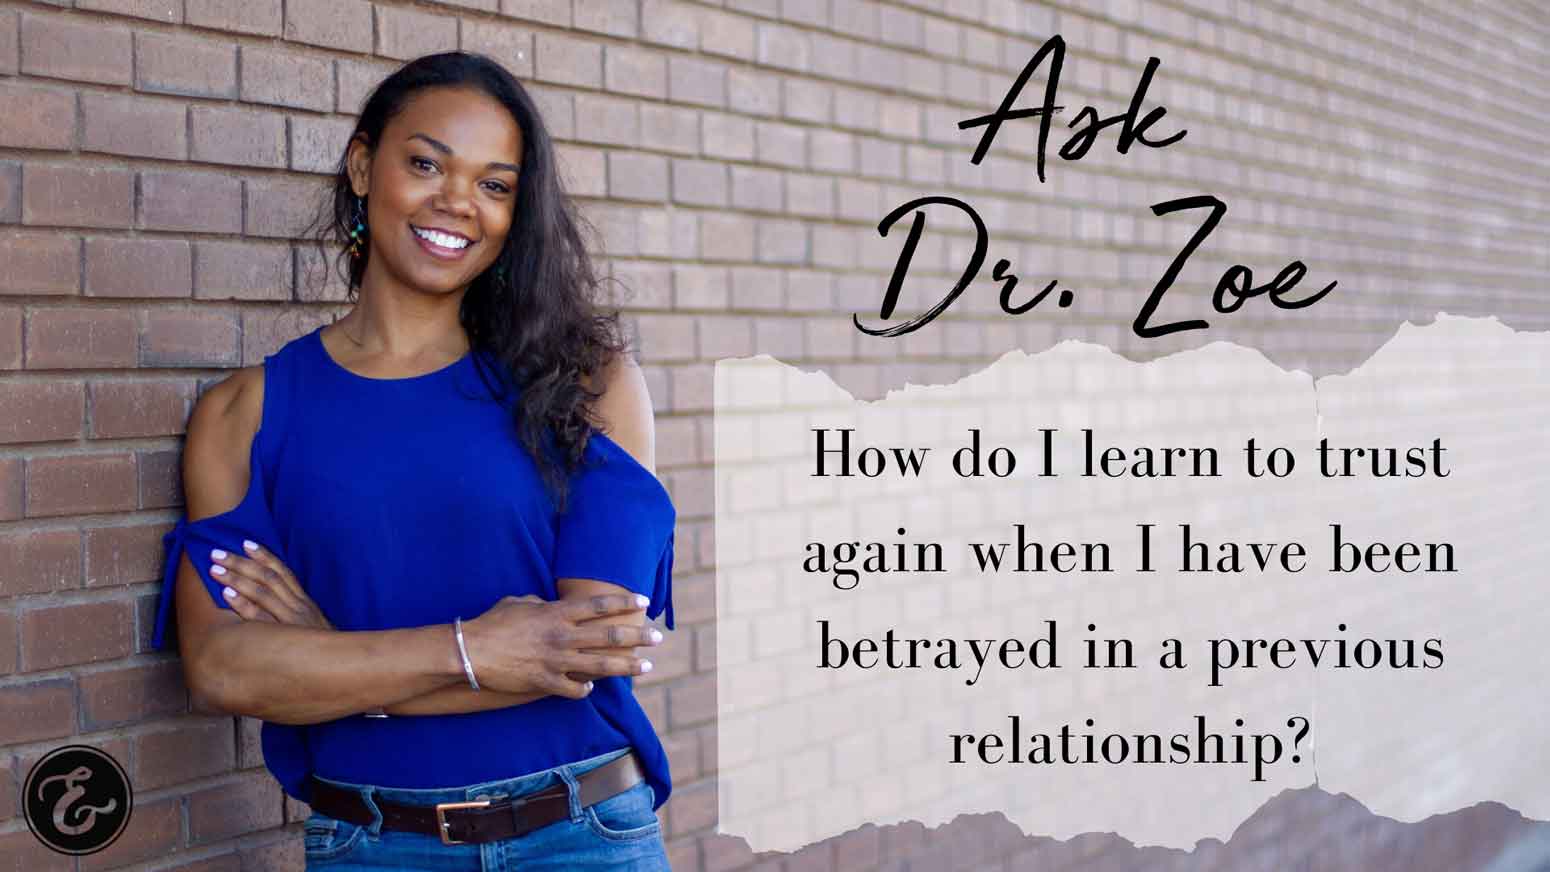 Ask Dr Zoe betrayed in a previous relationship